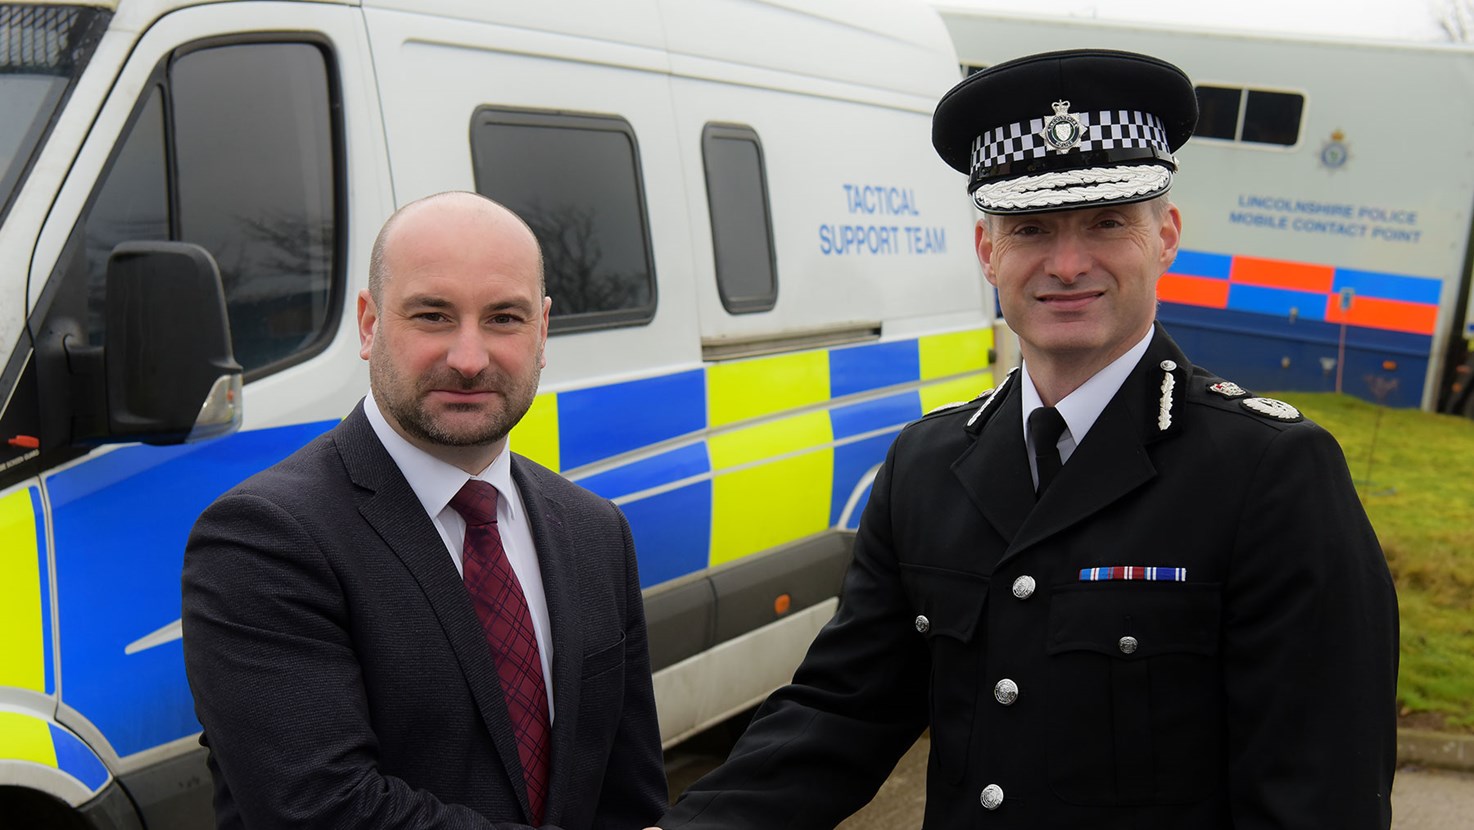 AN action plan to fight rural crime has been unveiled by the county’s police leaders.